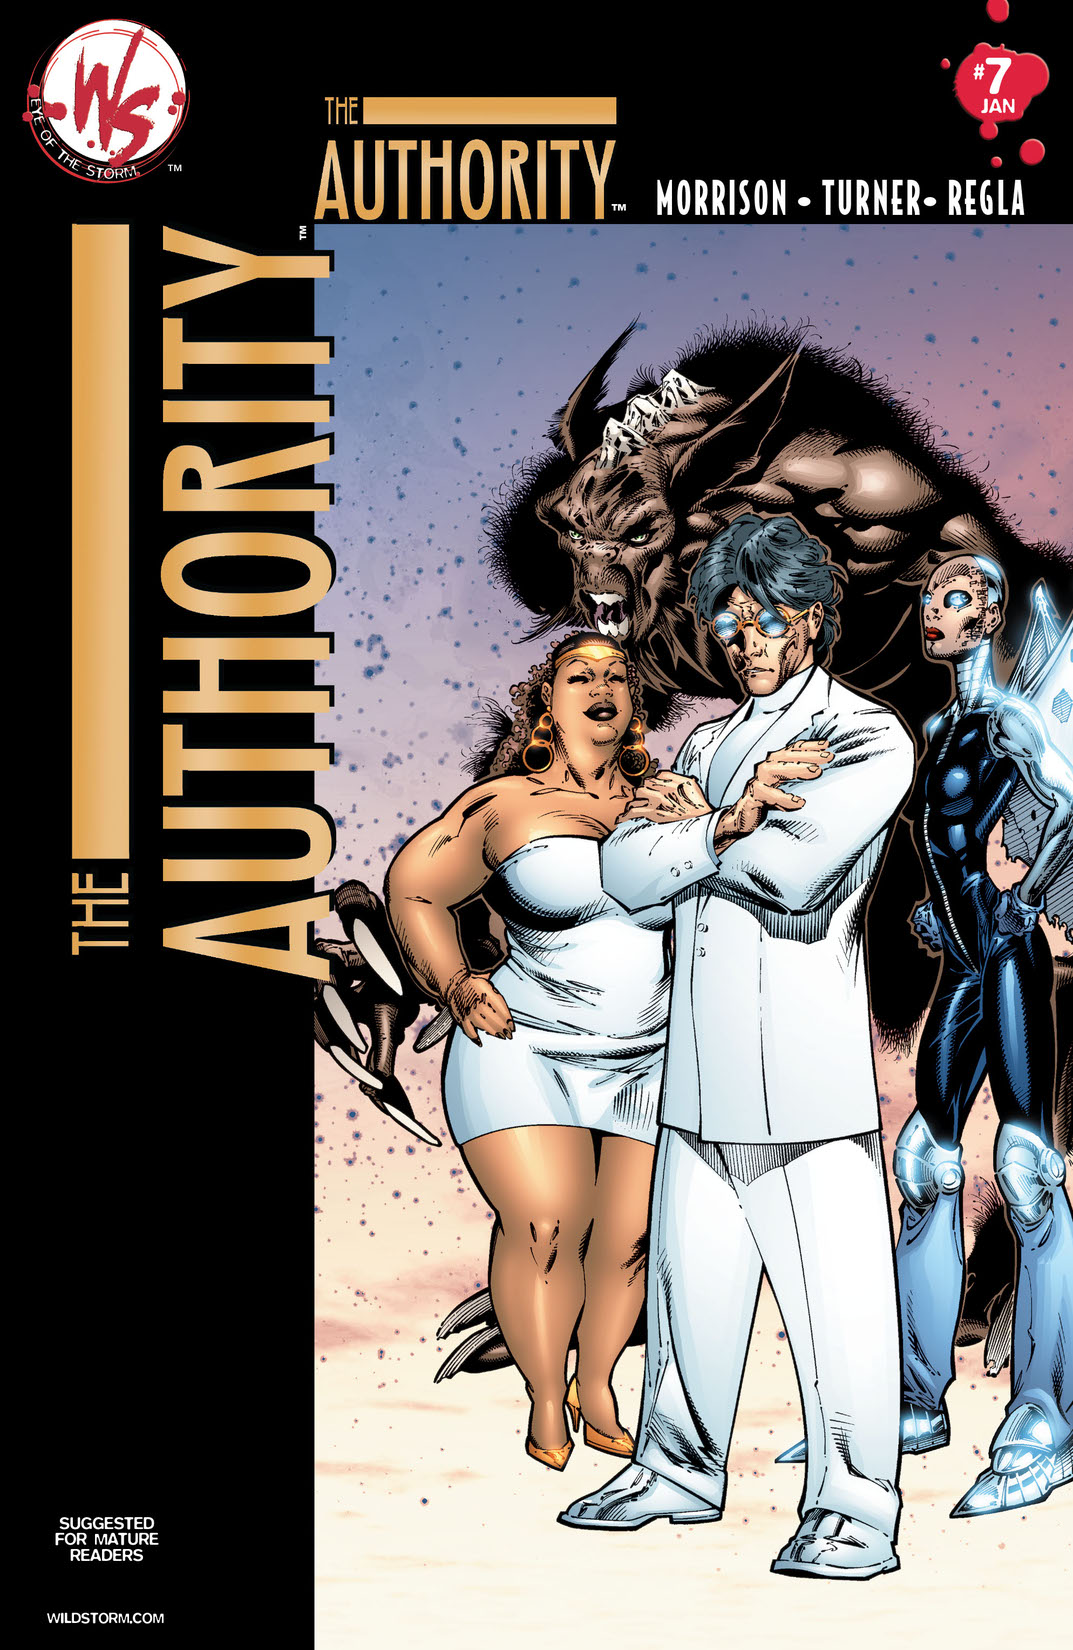 The Authority (2003-2004) #7 preview images